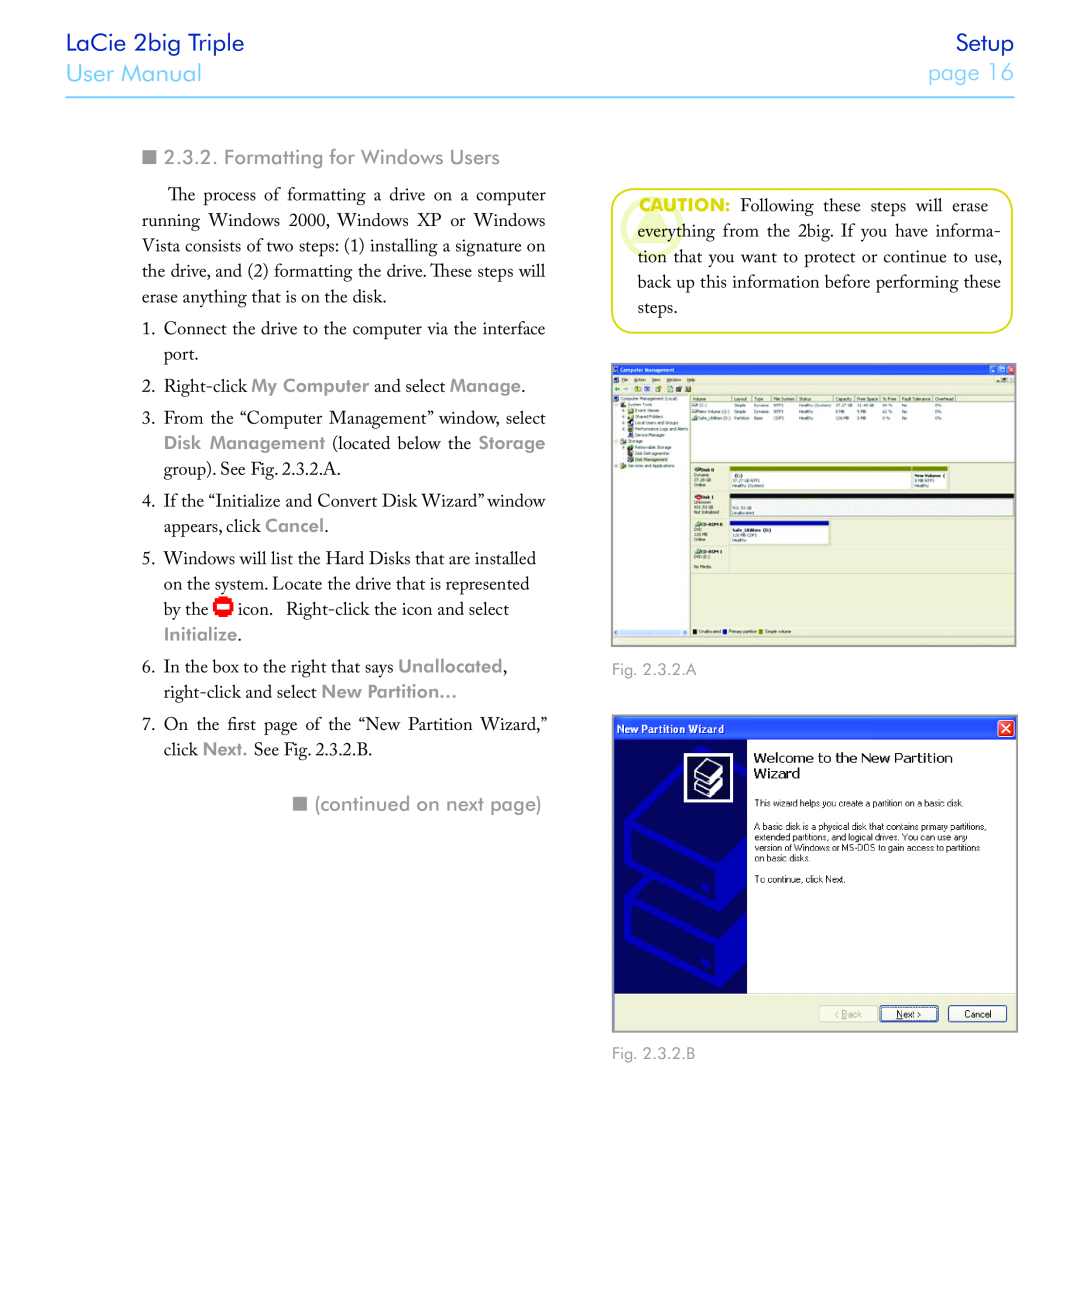 LaCie 2big triple Formatting for Windows Users, continued on next page, Initialize, LaCie 2big Triple, Setup, User Manual 